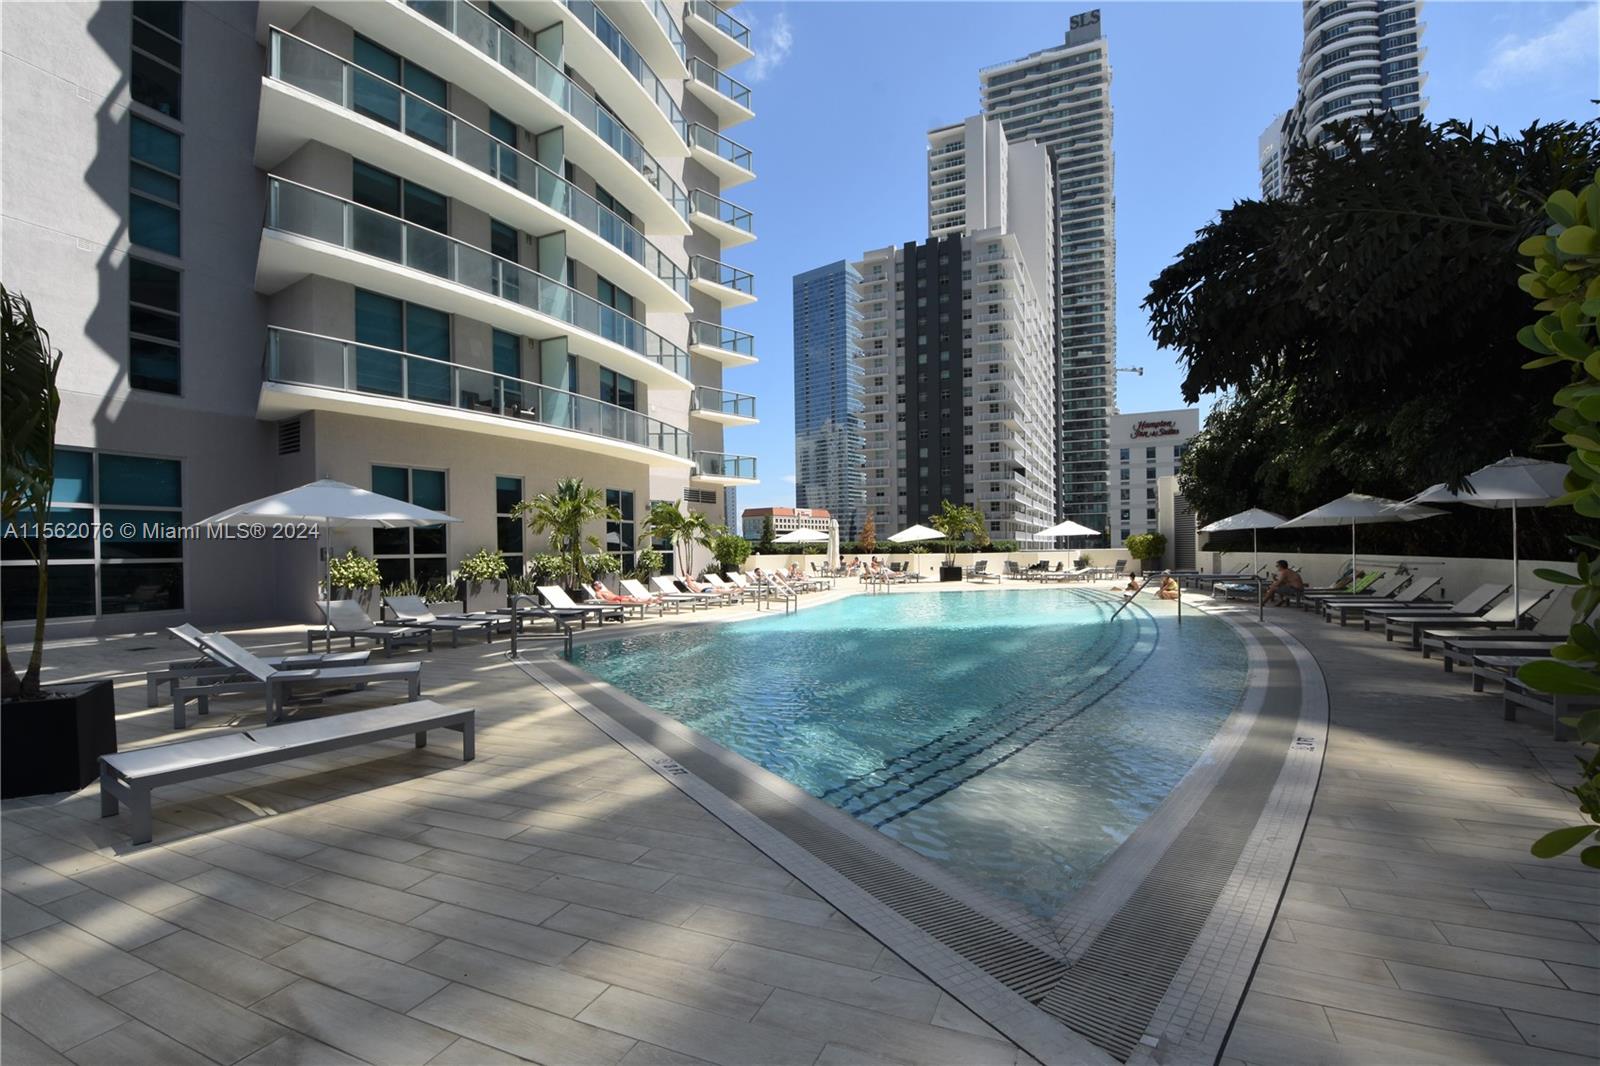 1 BED /1 BATH + 1 DEN. Beautiful unit at Millecento, a piece of Art in Brickell. Enjoy living your best life. Italian
kitchen with quartz counter tops. 2 pools, rooftop, amazing gym, spa, other socials areas.